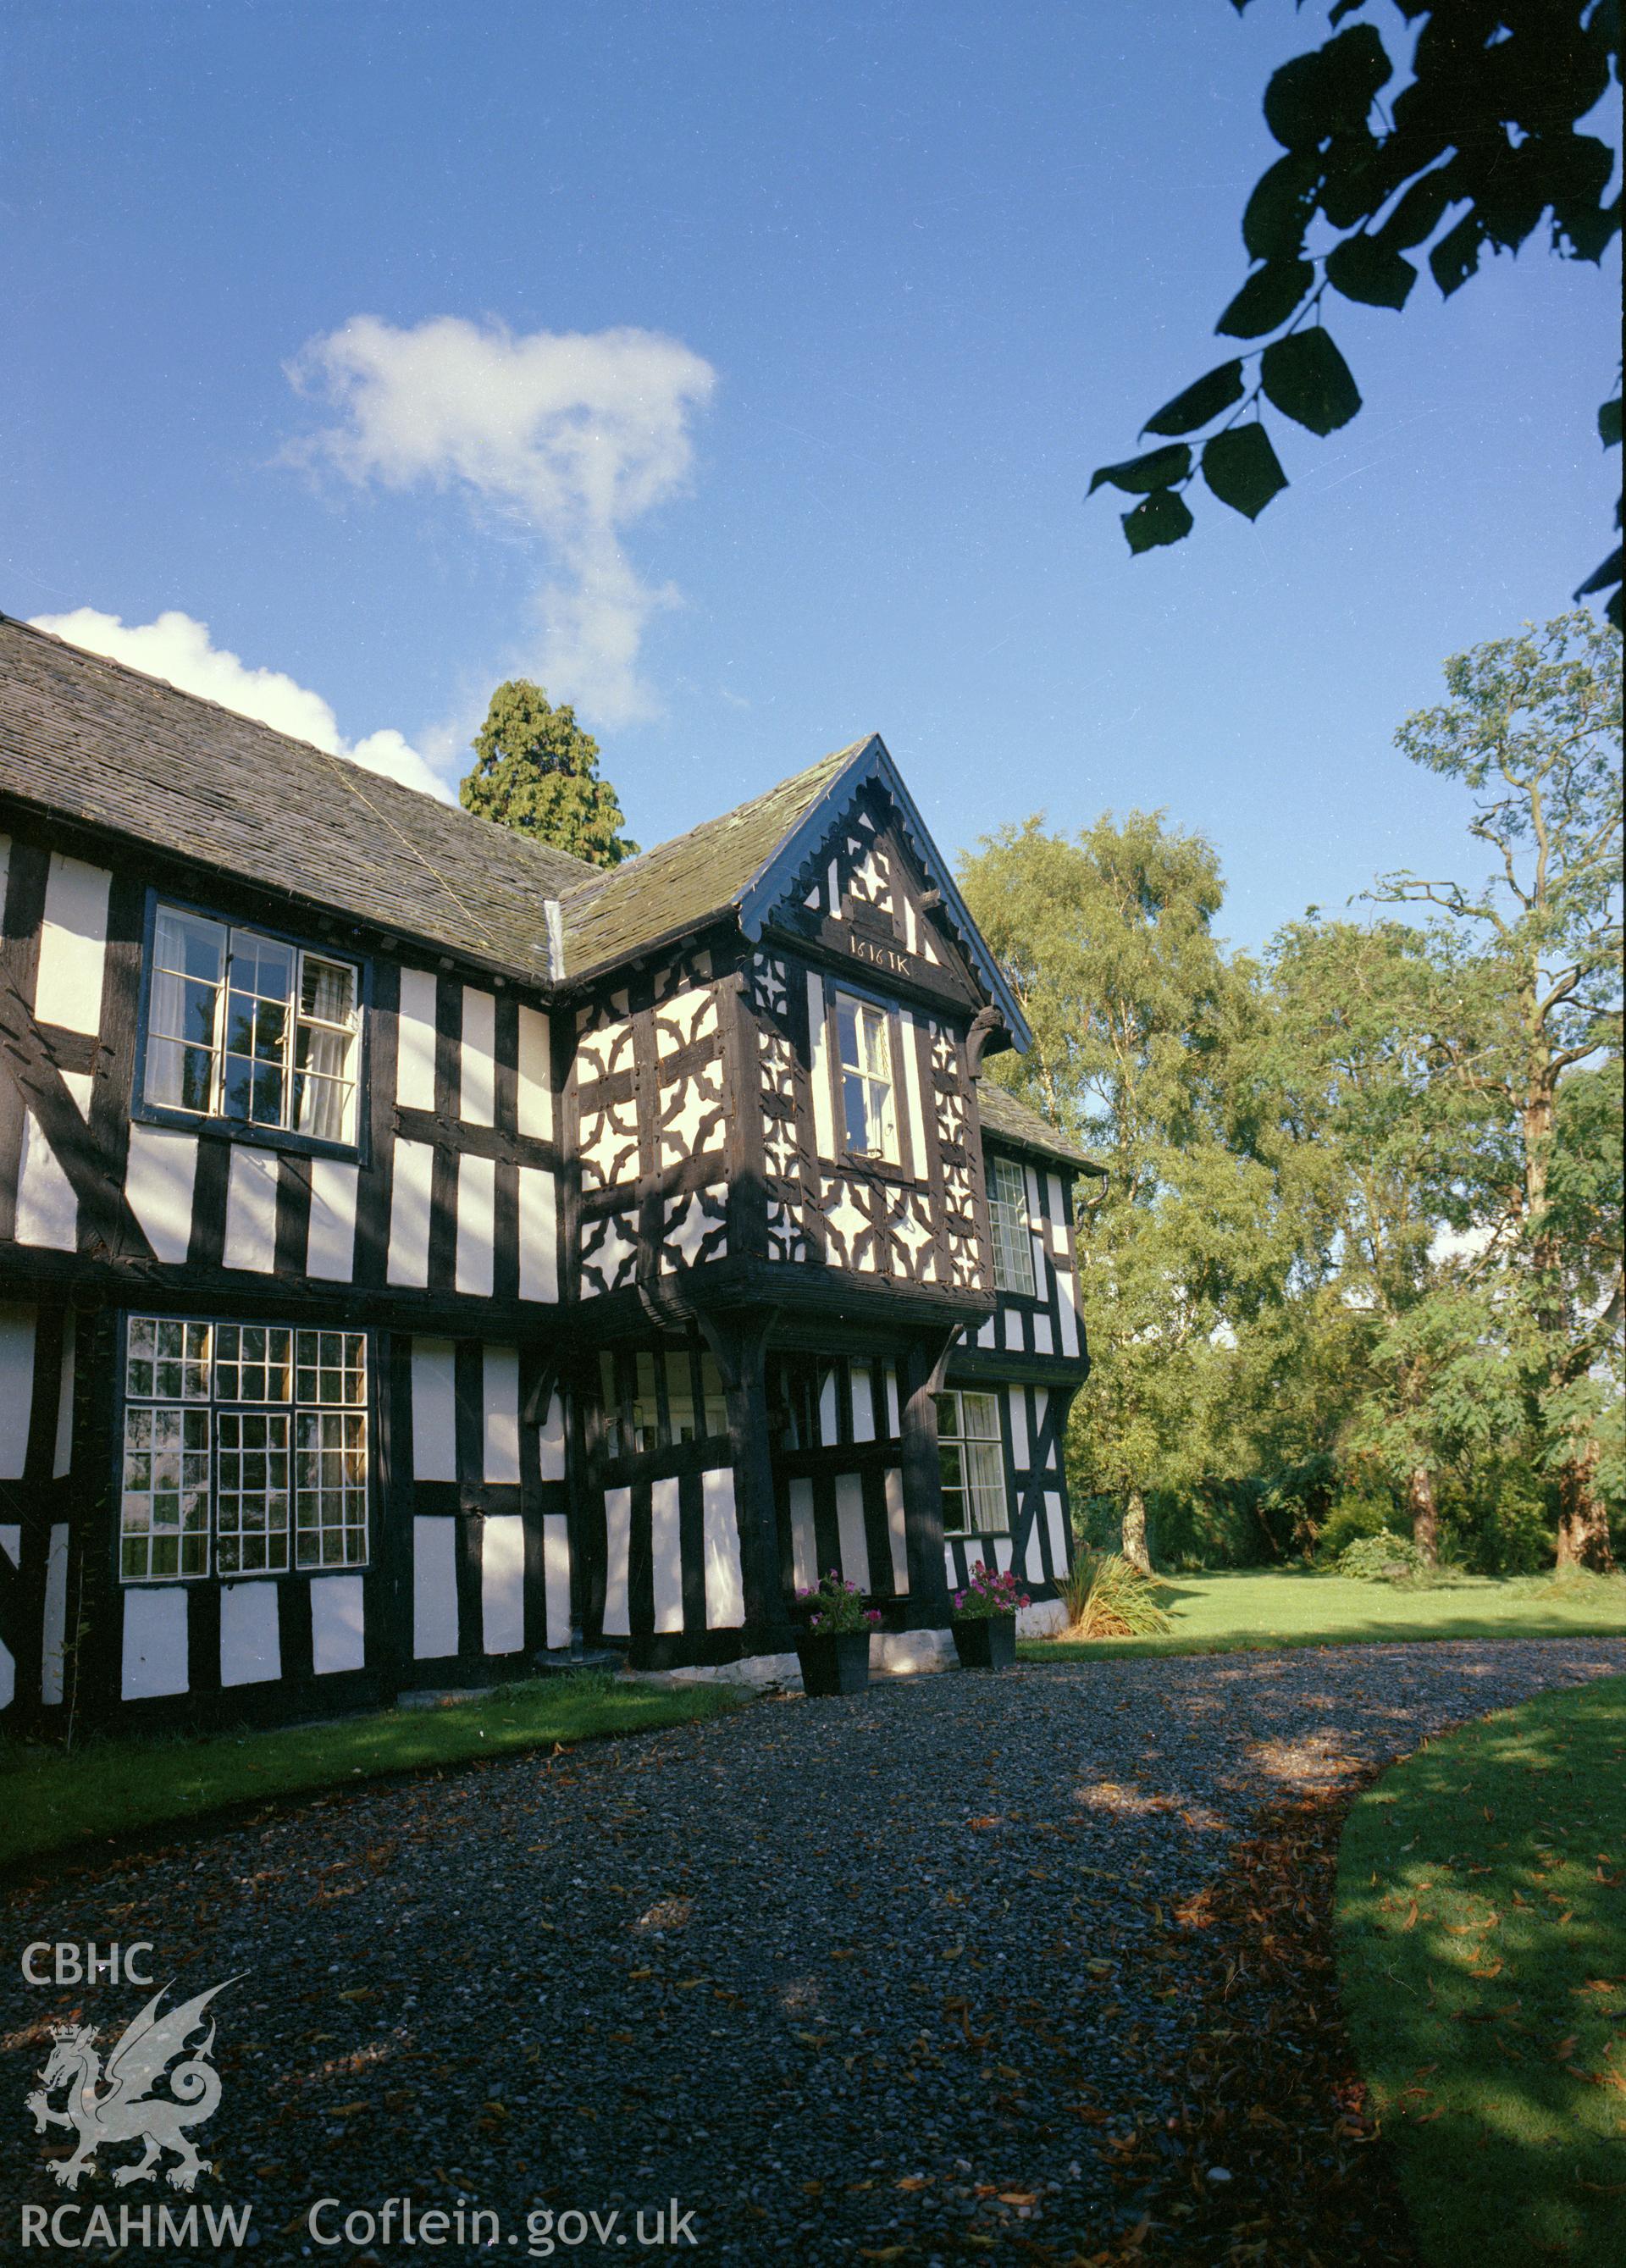 Digital copy of a colour negative showing view of The Old Vicarage, Berriew, taken by RCAHMW.